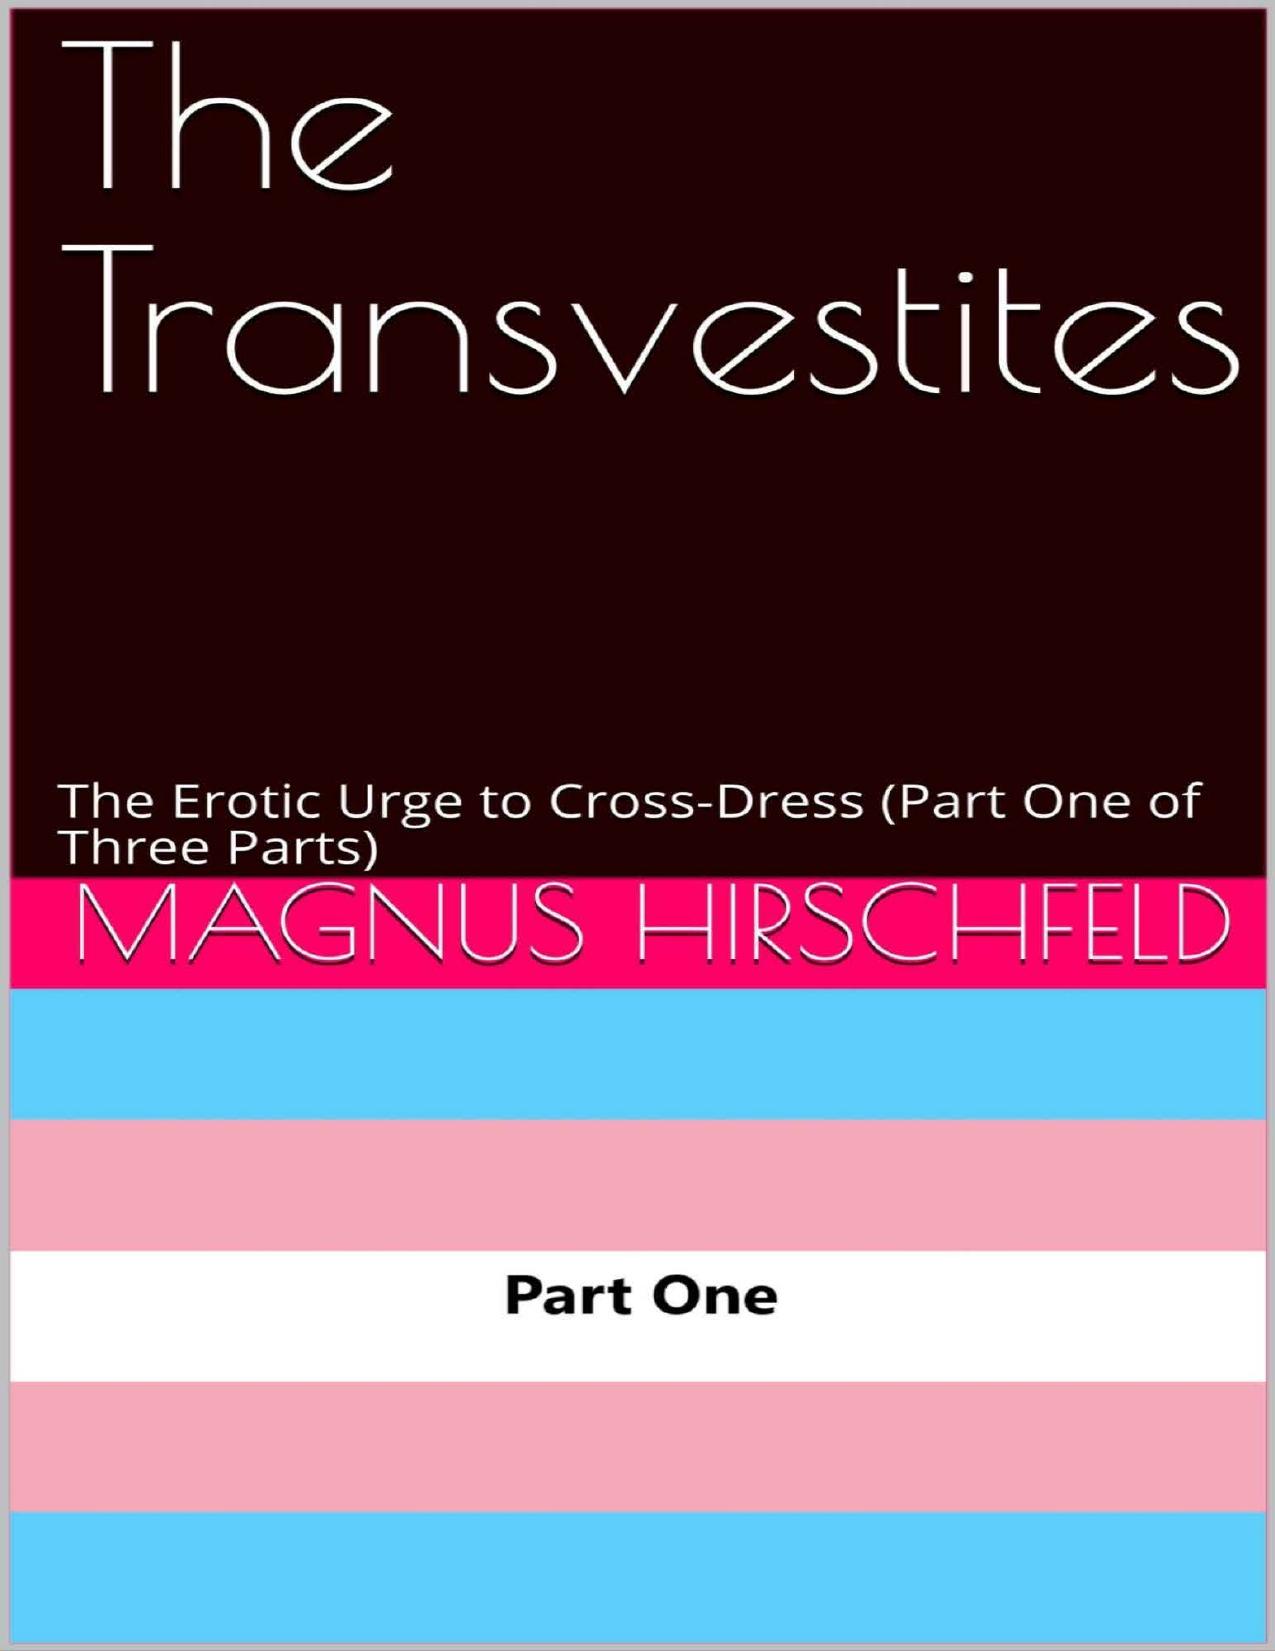 The Transvestites: The Erotic Urge to Cross-Dress (Part One of Three Parts) by Magnus Hirschfeld